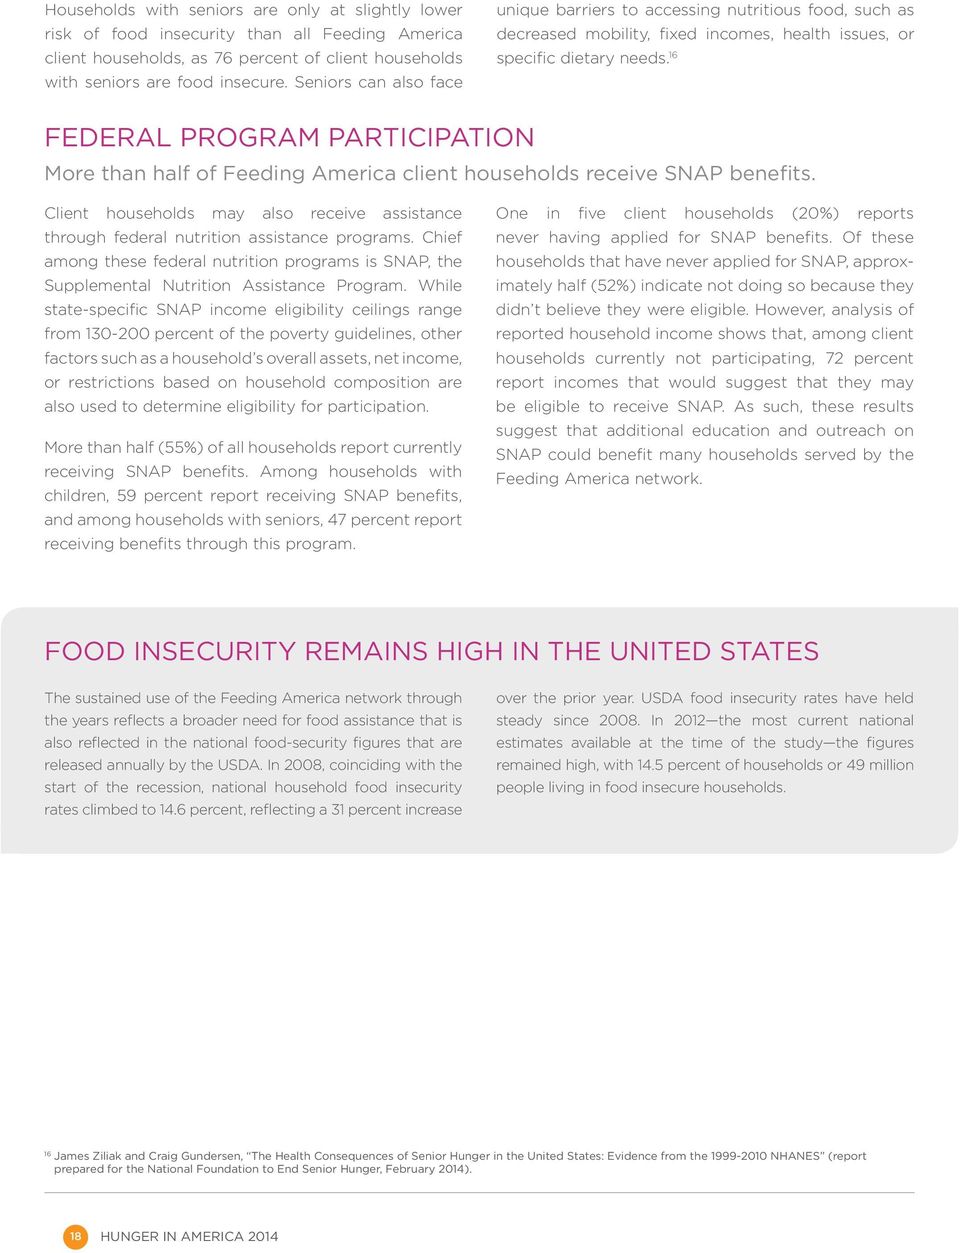 16 FEDERAL PROGRAM PARTICIPATION More than half of Feeding America client households receive SNAP benefits. Client households may also receive assistance through federal nutrition assistance programs.